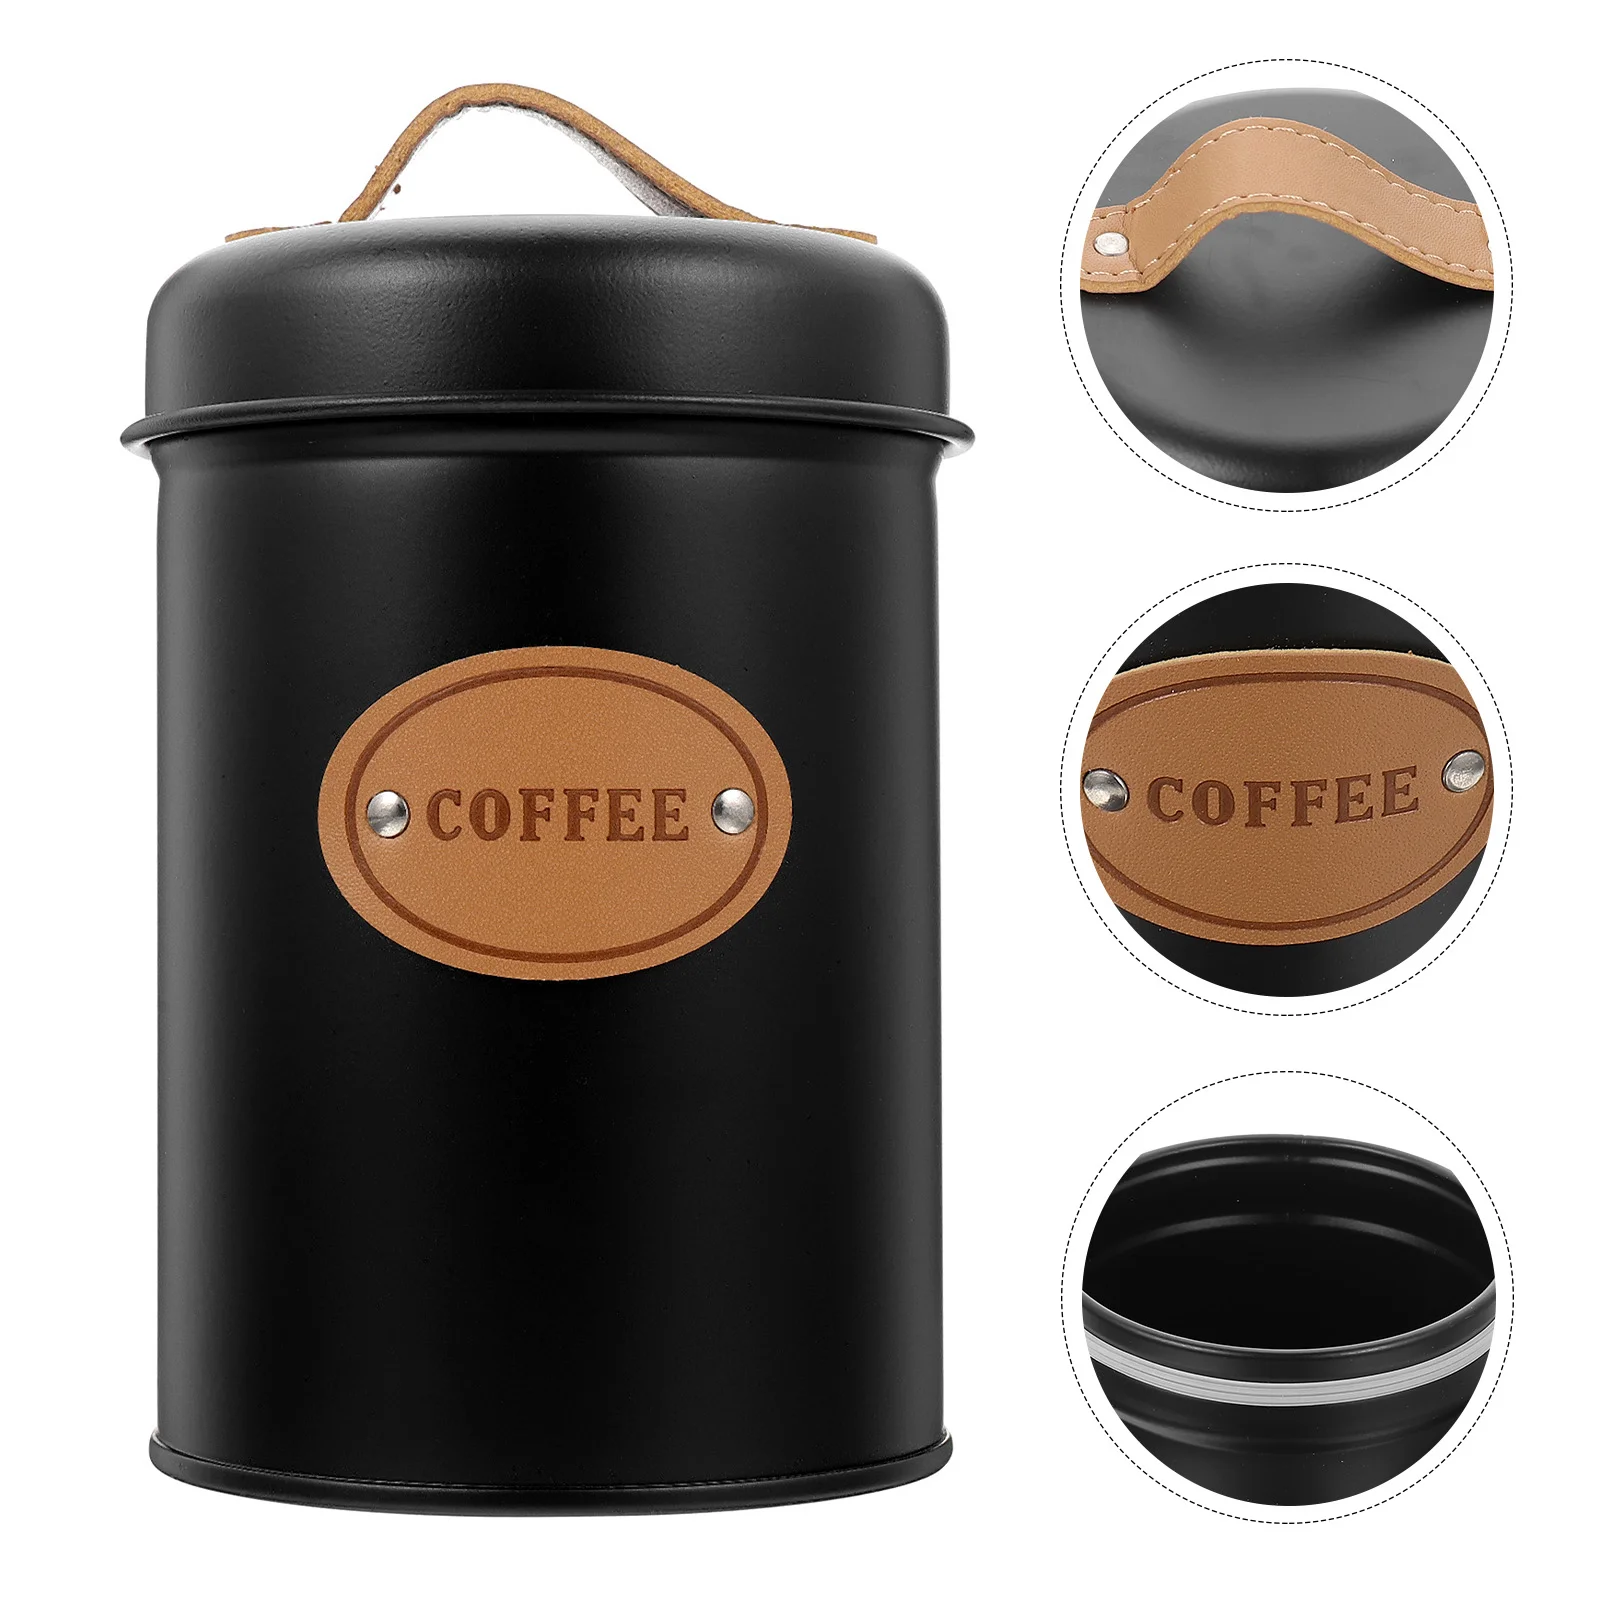 

Canister Tea Tin Jars Canisters Jar Metal Coffee Tins Containers Storage Container Lids Box Candy Sugar Airtight Tinplate